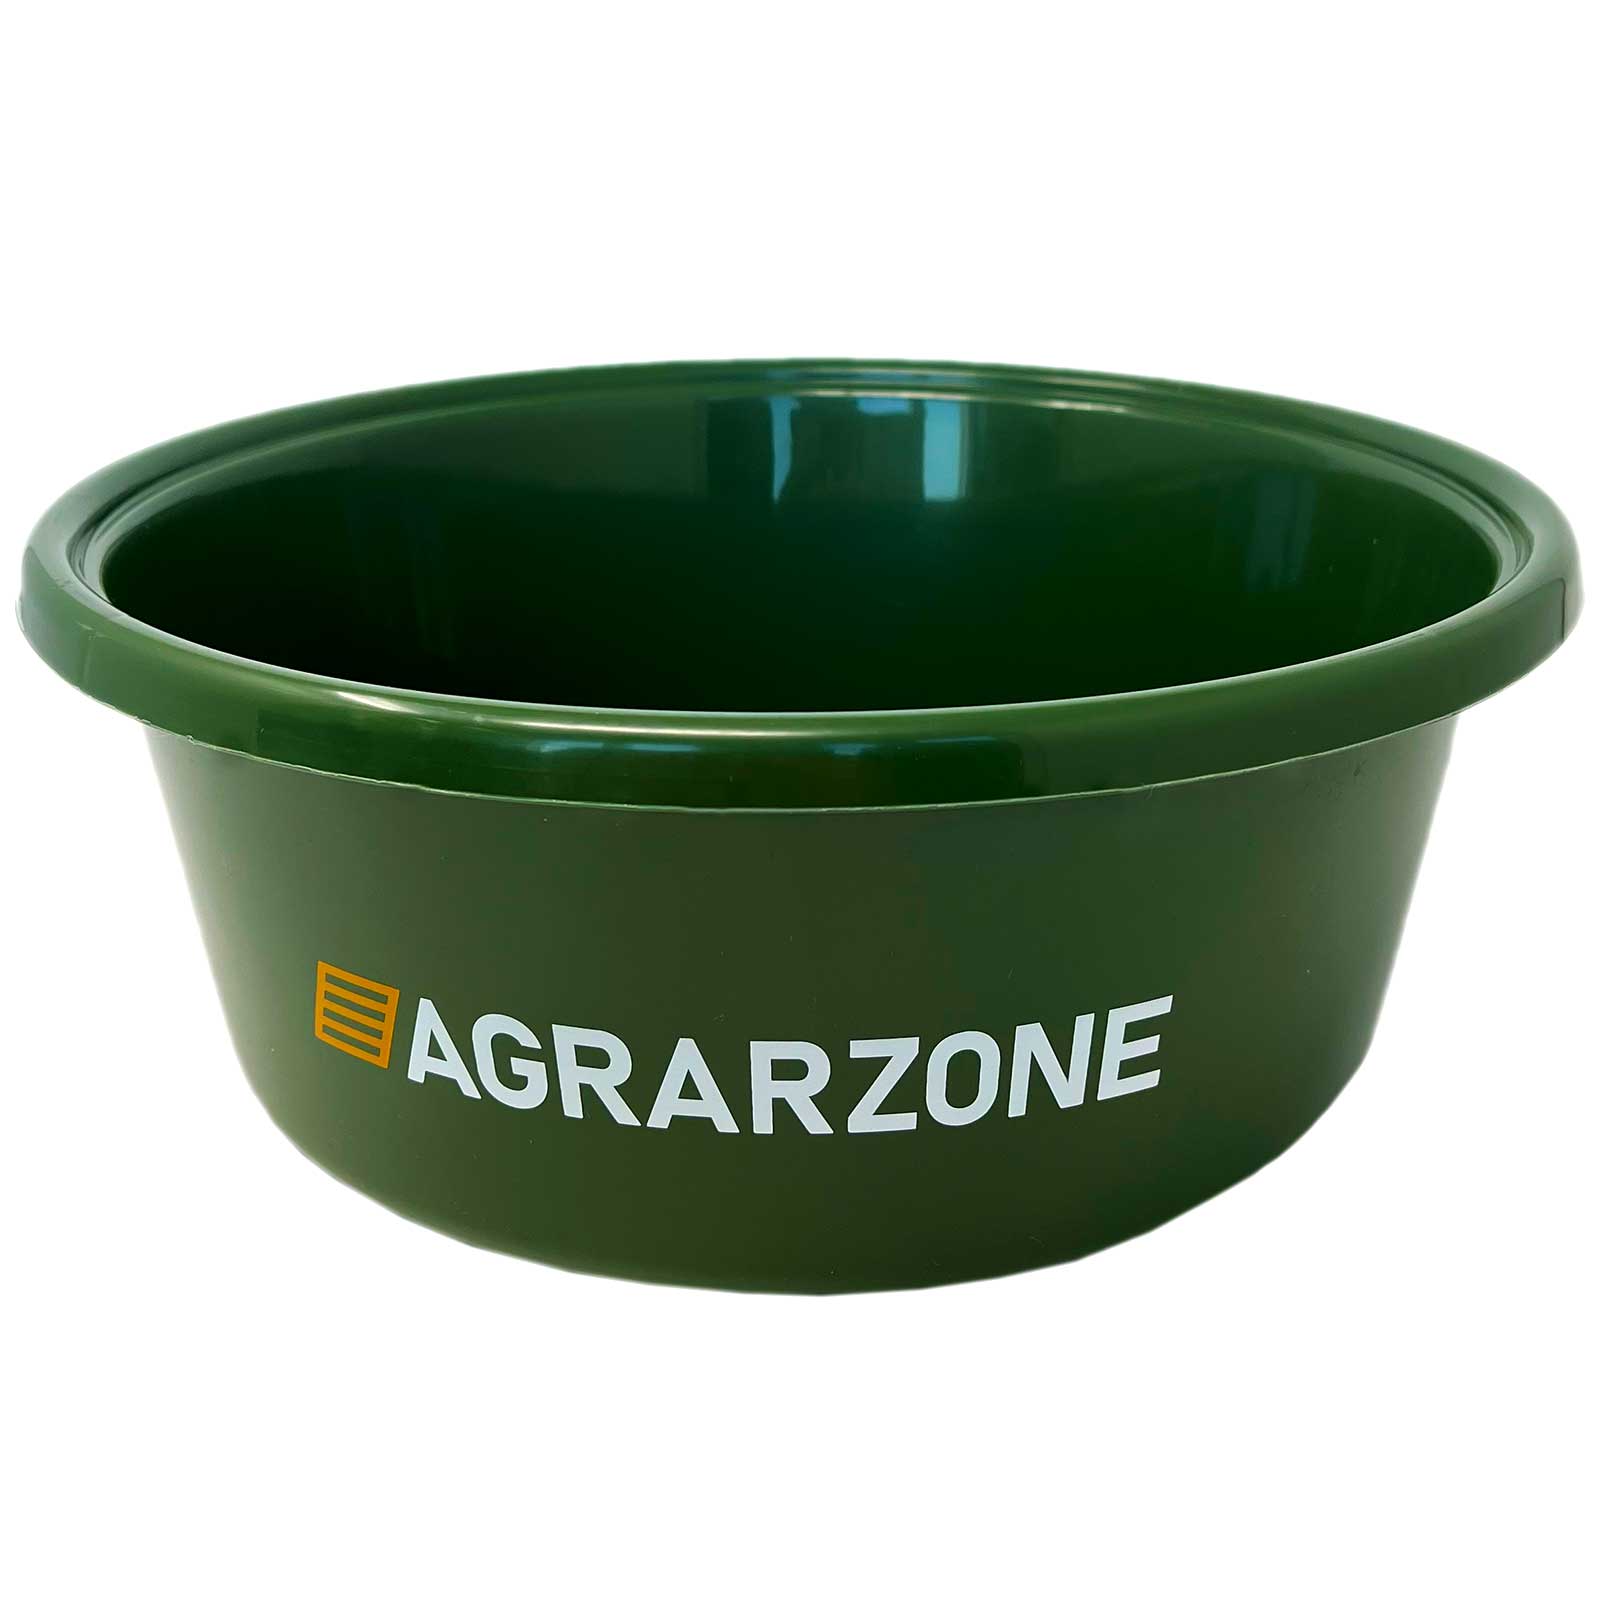 Agrarzone Foodbowl with lid 6 litre